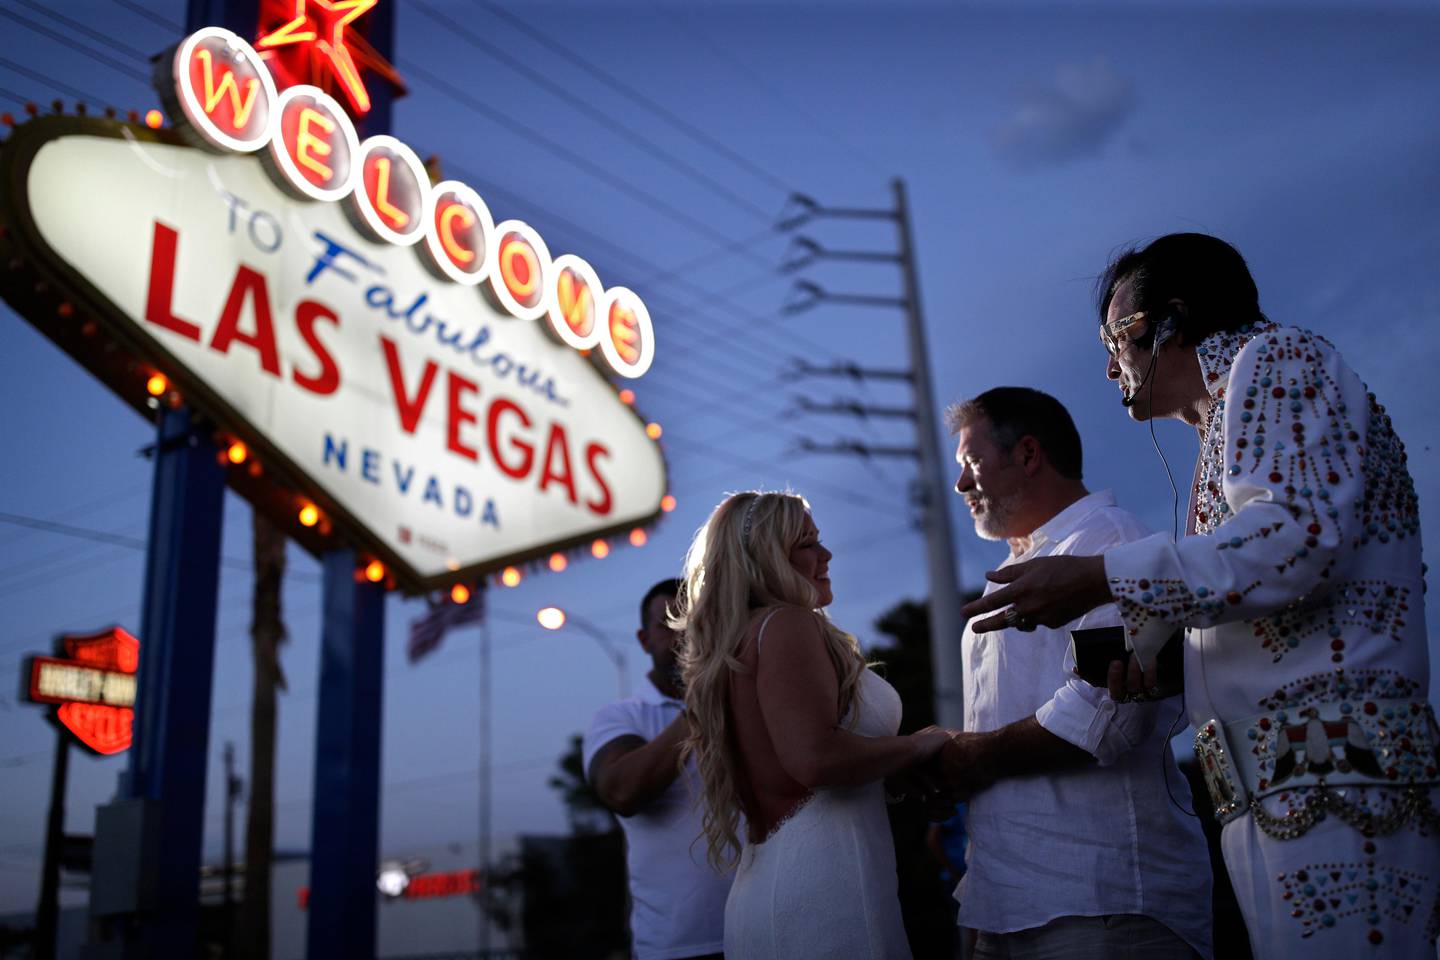 In this Aug. 1, 2017, photo, Eddie Powers, right, performs as Elvis during a wedding for Wil and Sarah Wilson in Las Vegas. Powers works full-time as an Elvis tribute artist performing at weddings and leading Elvis themed tours around Las Vegas. (AP Photo/John Locher)